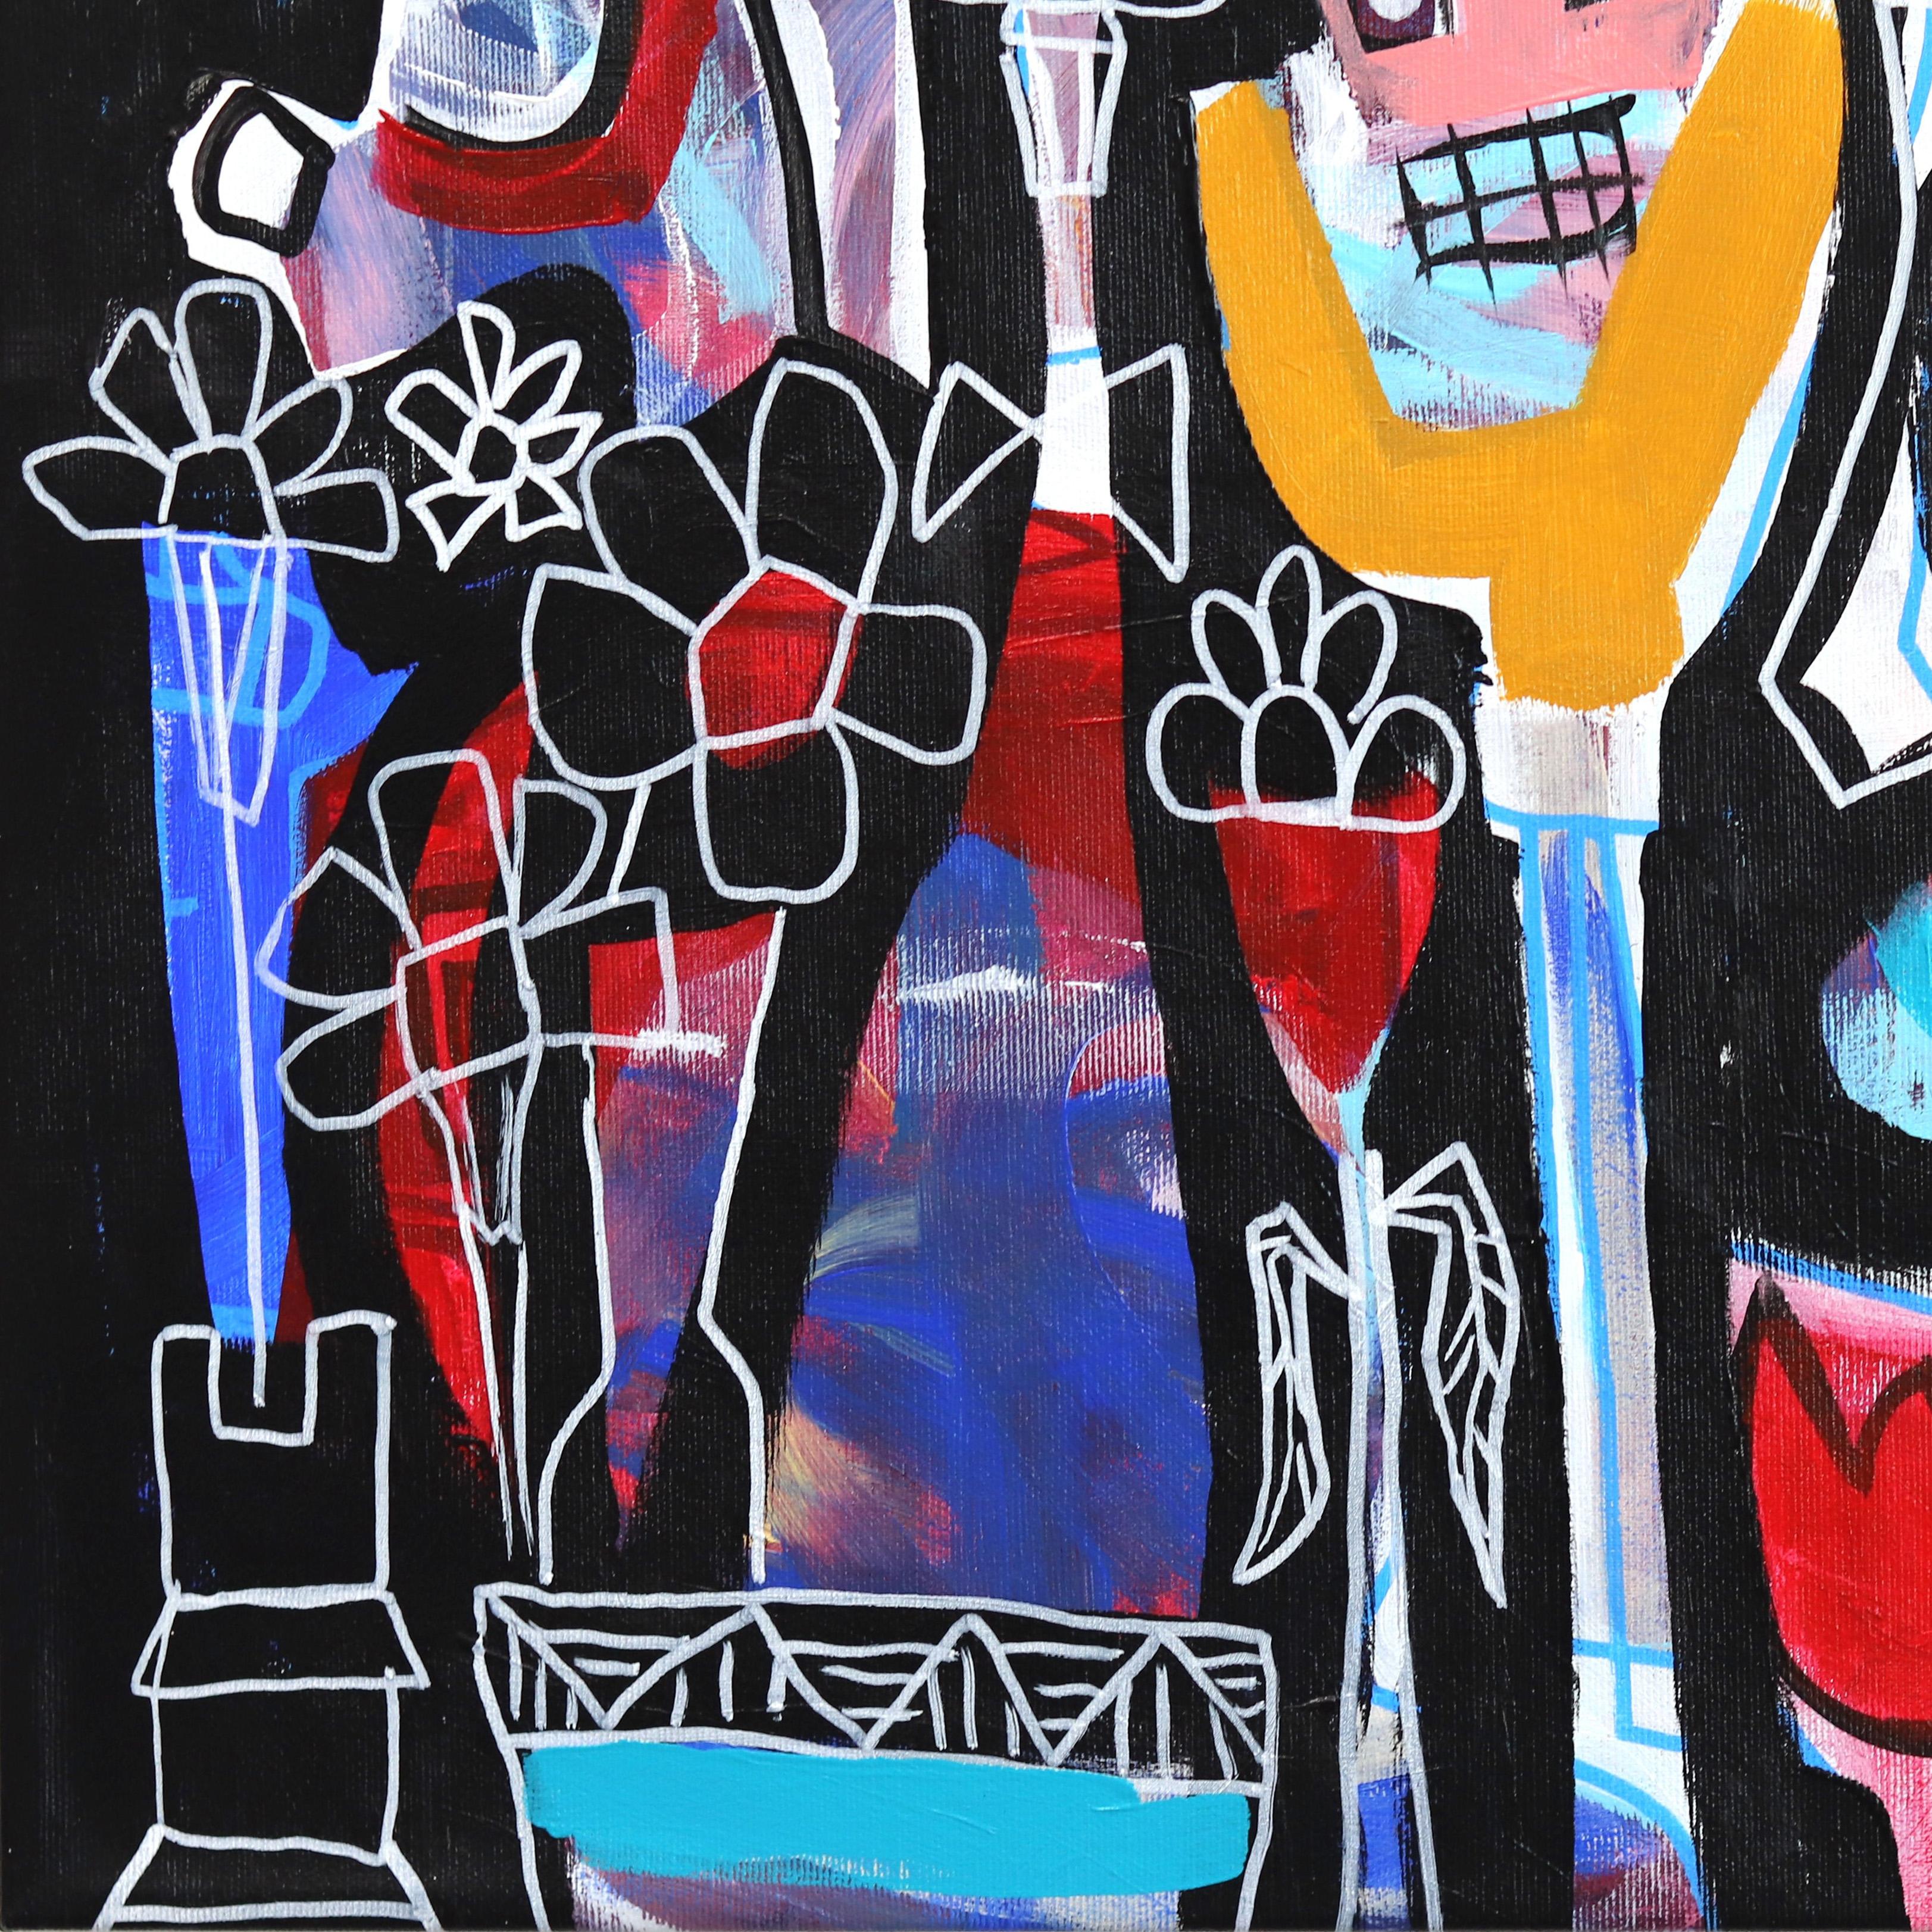 Hands Up - Friends and Family Neo-Expressionist Large Painting on Canvas For Sale 3